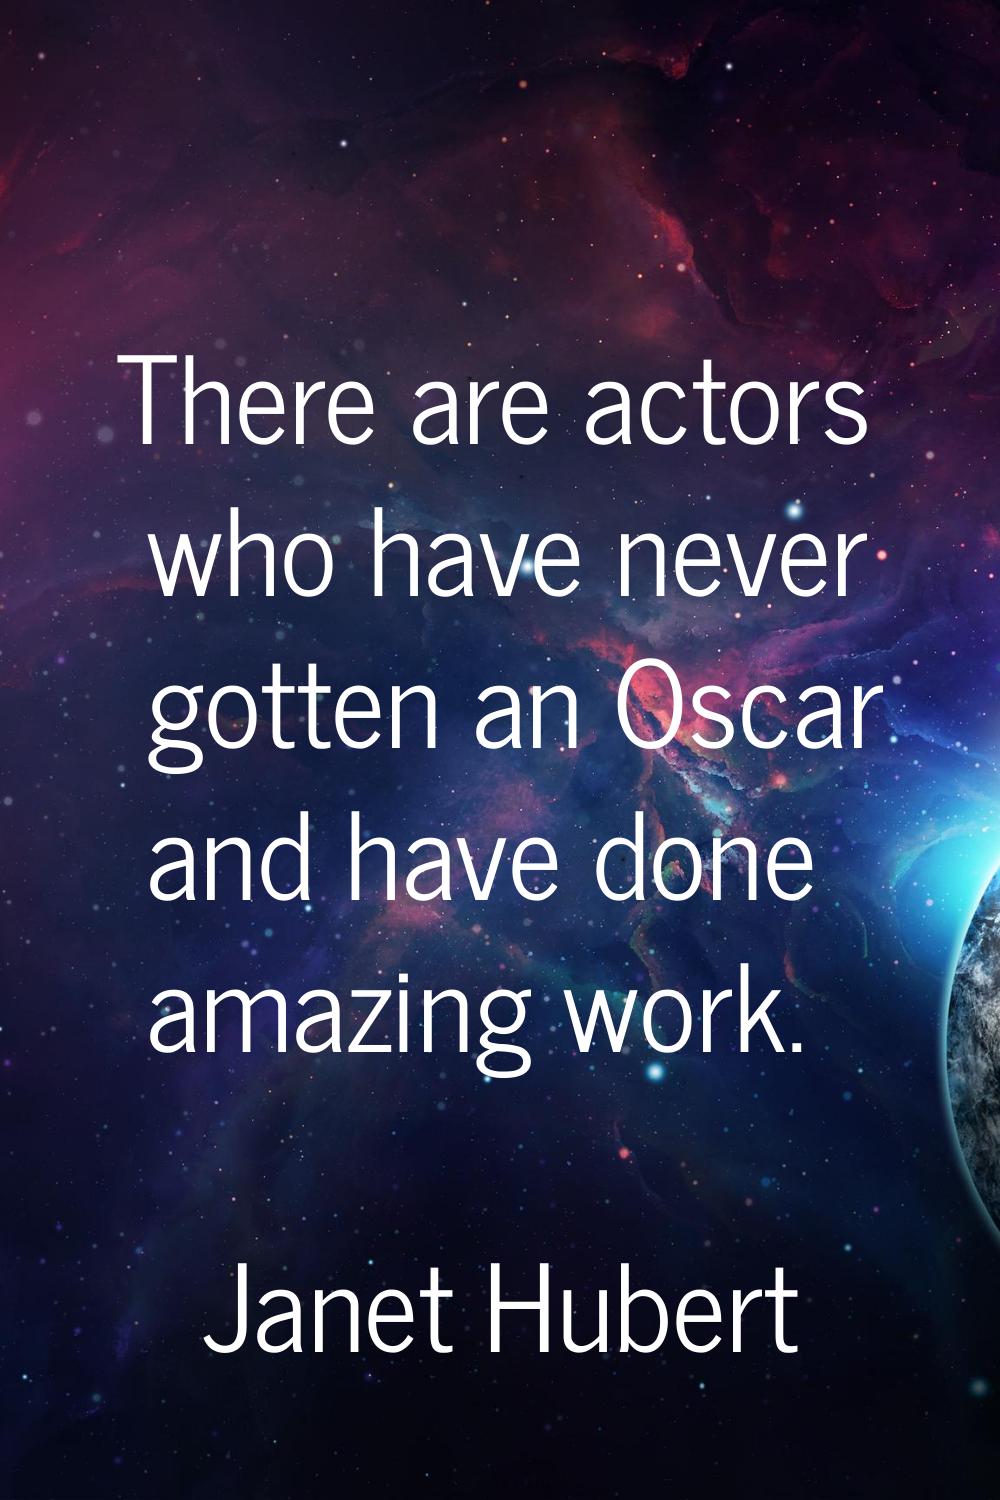 There are actors who have never gotten an Oscar and have done amazing work.